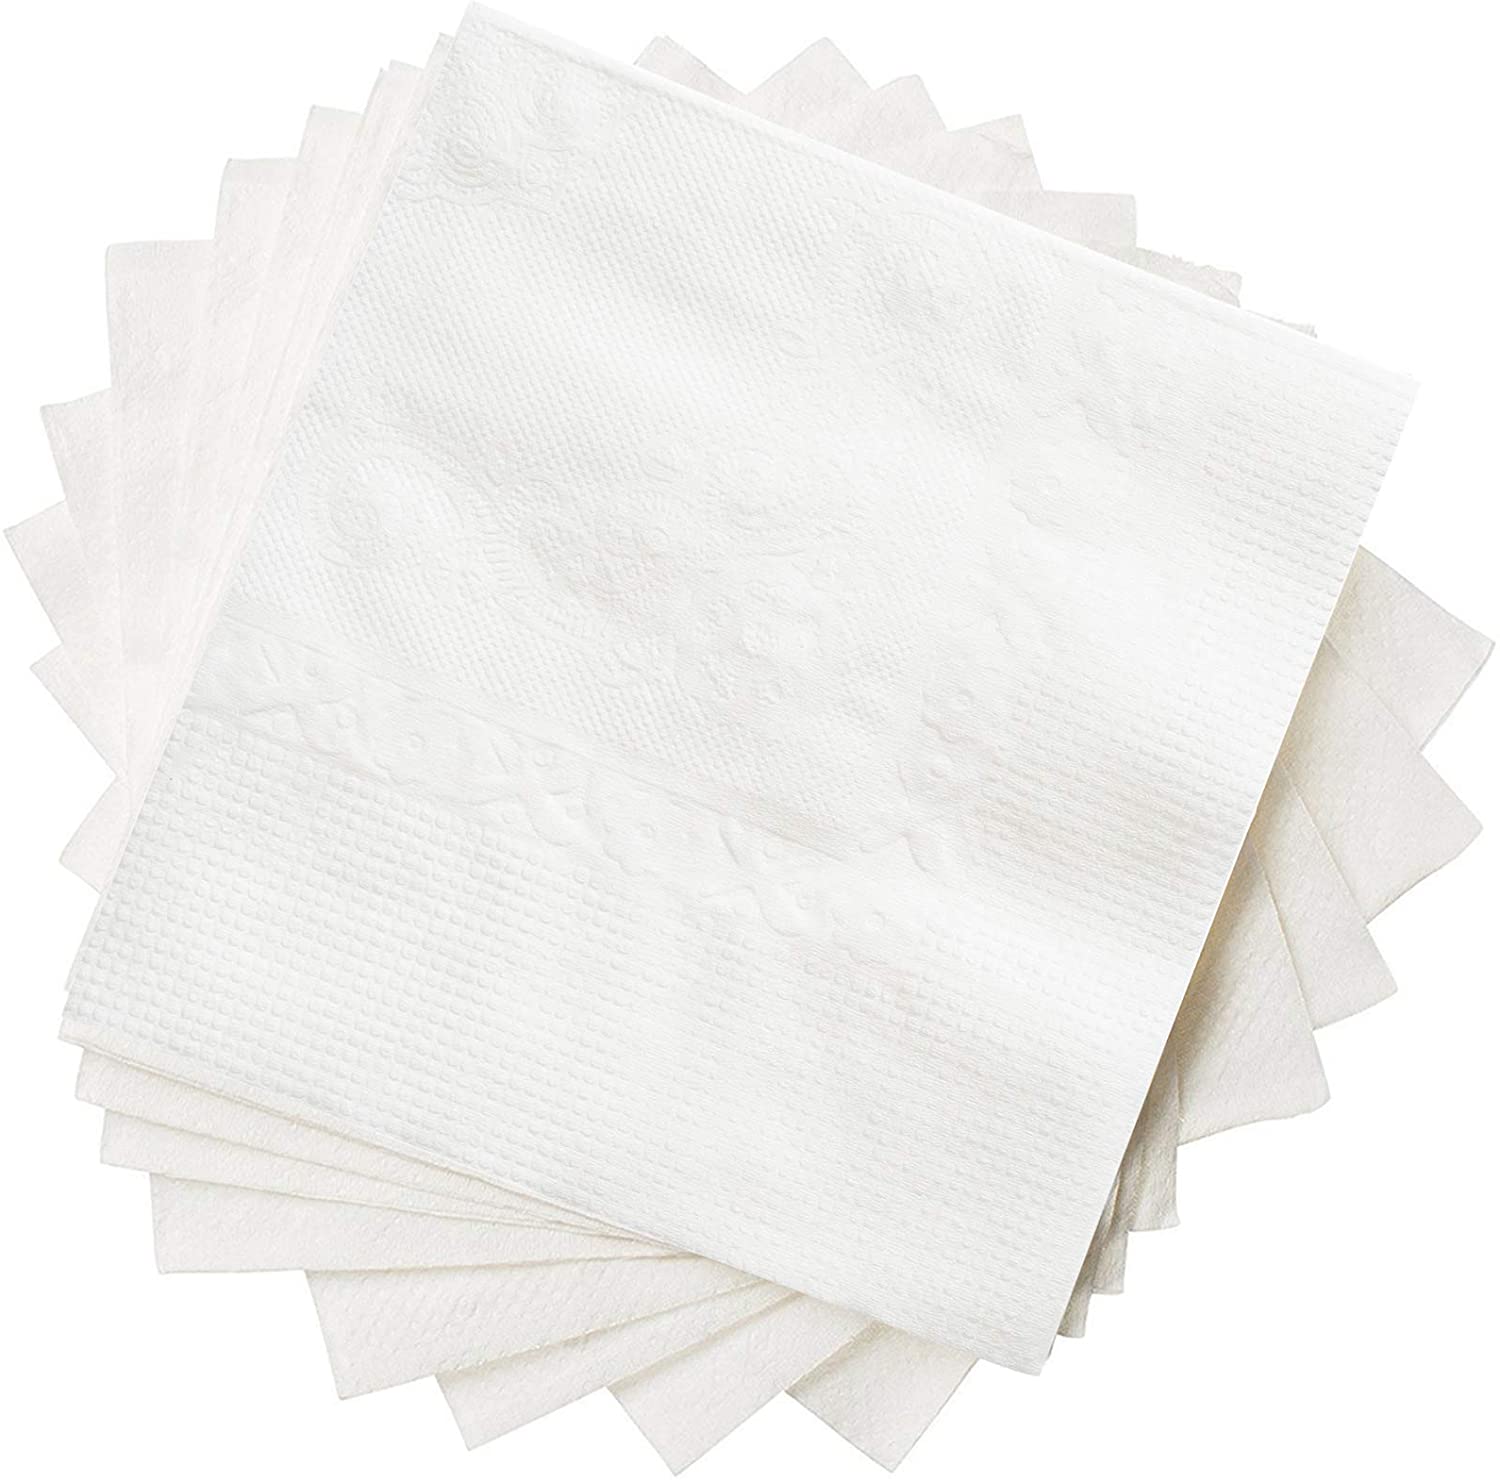 Comfy Package Absorbent 1-Ply Cocktail Napkins, 500-Count